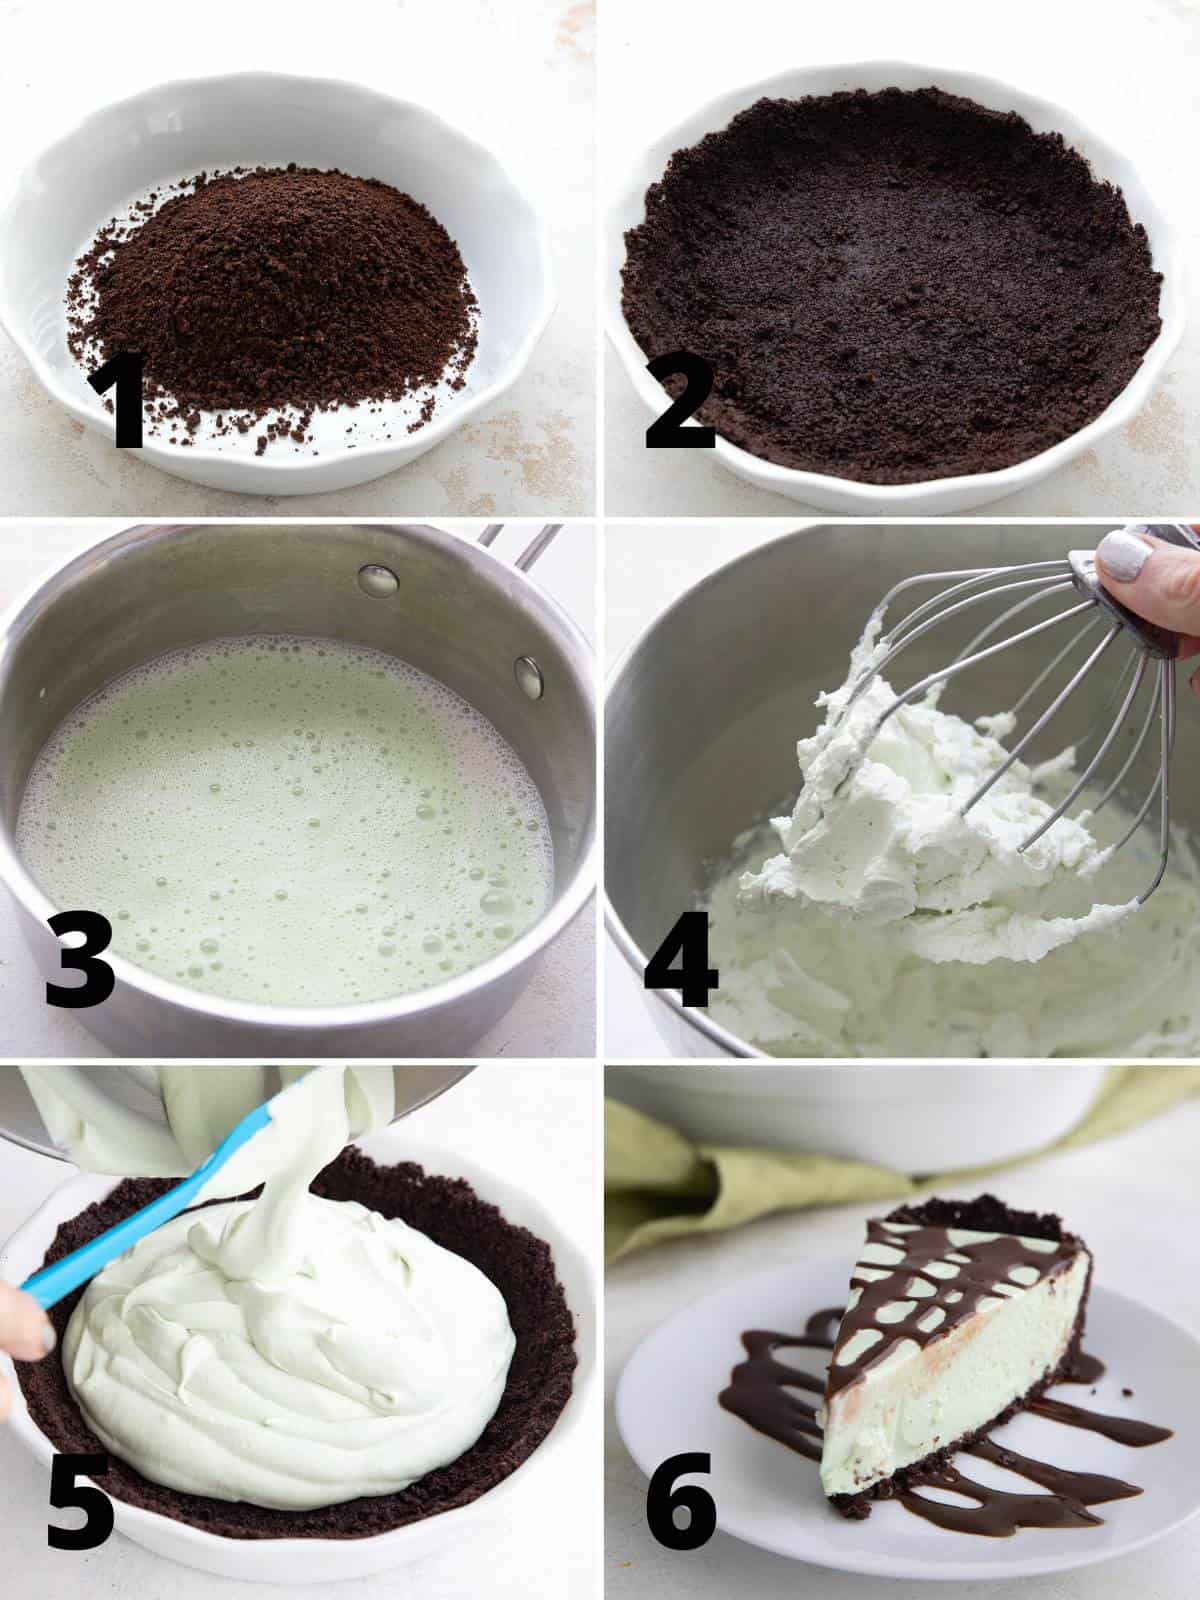 A collage of 6 images showing the steps for making Keto Grasshopper Pie.